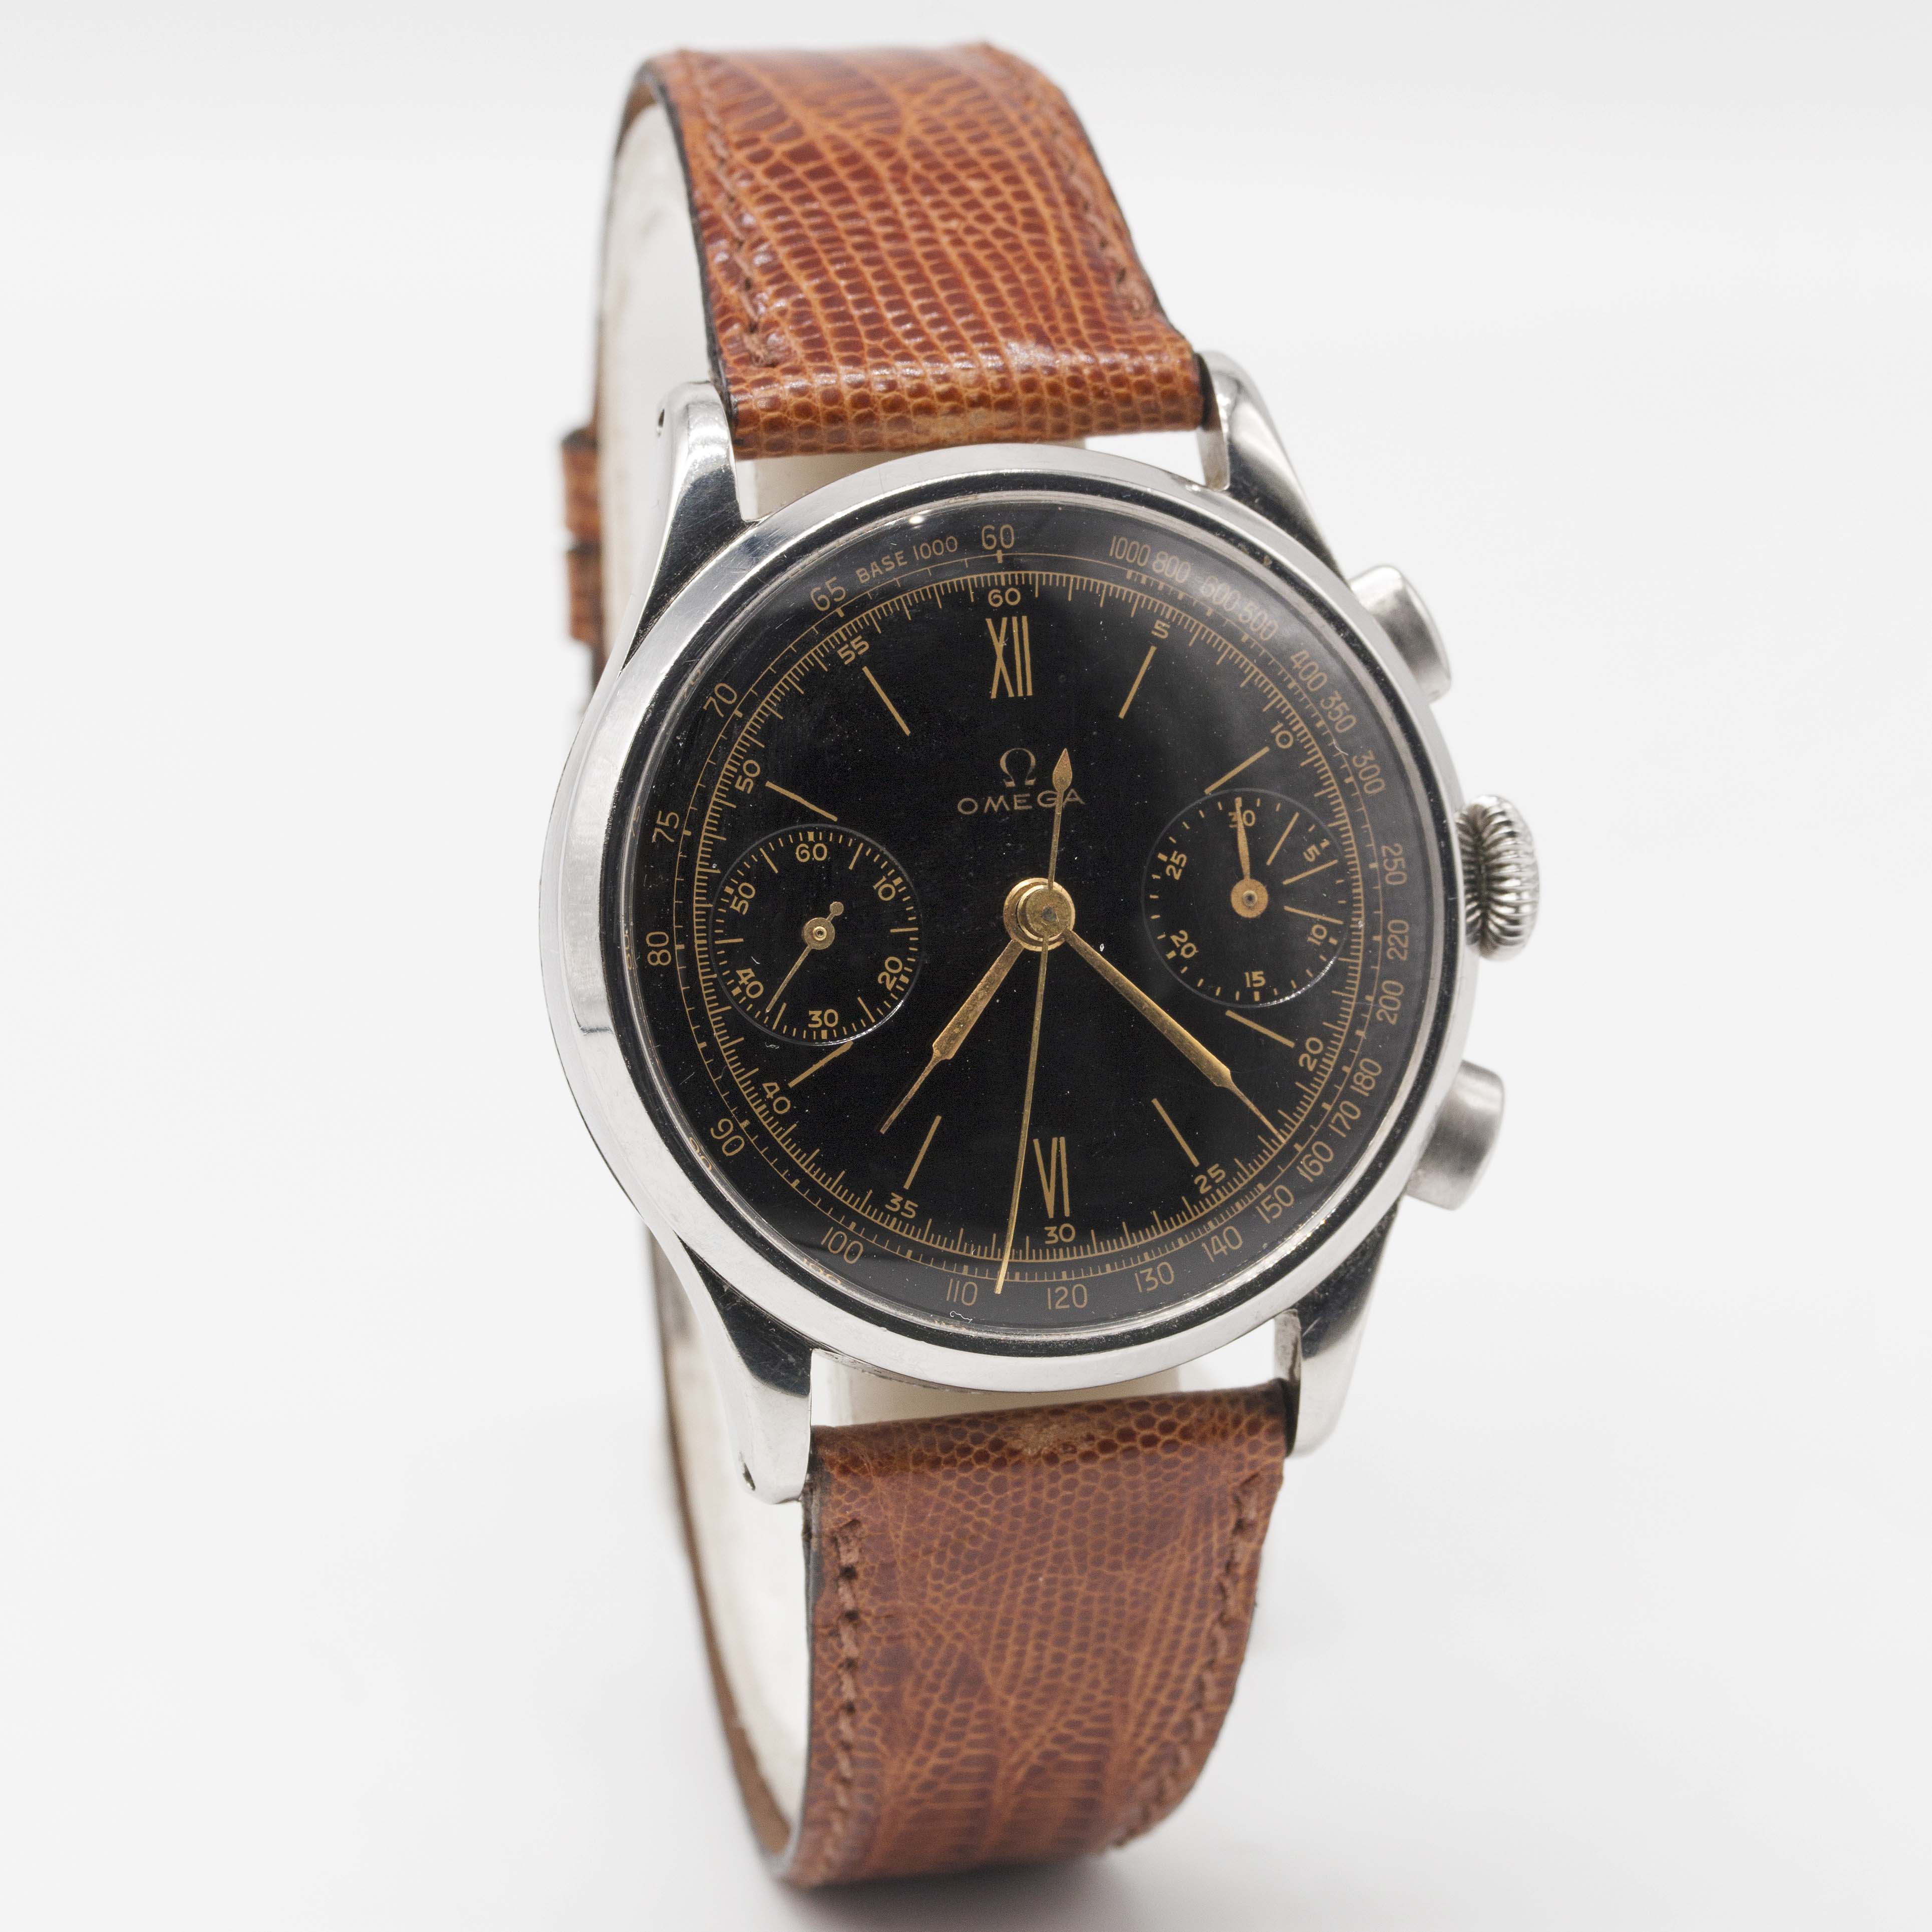 A VERY RARE GENTLEMAN'S LARGE SIZE STAINLESS STEEL OMEGA "33.3" CHRONOGRAPH WRIST WATCH CIRCA - Image 6 of 11